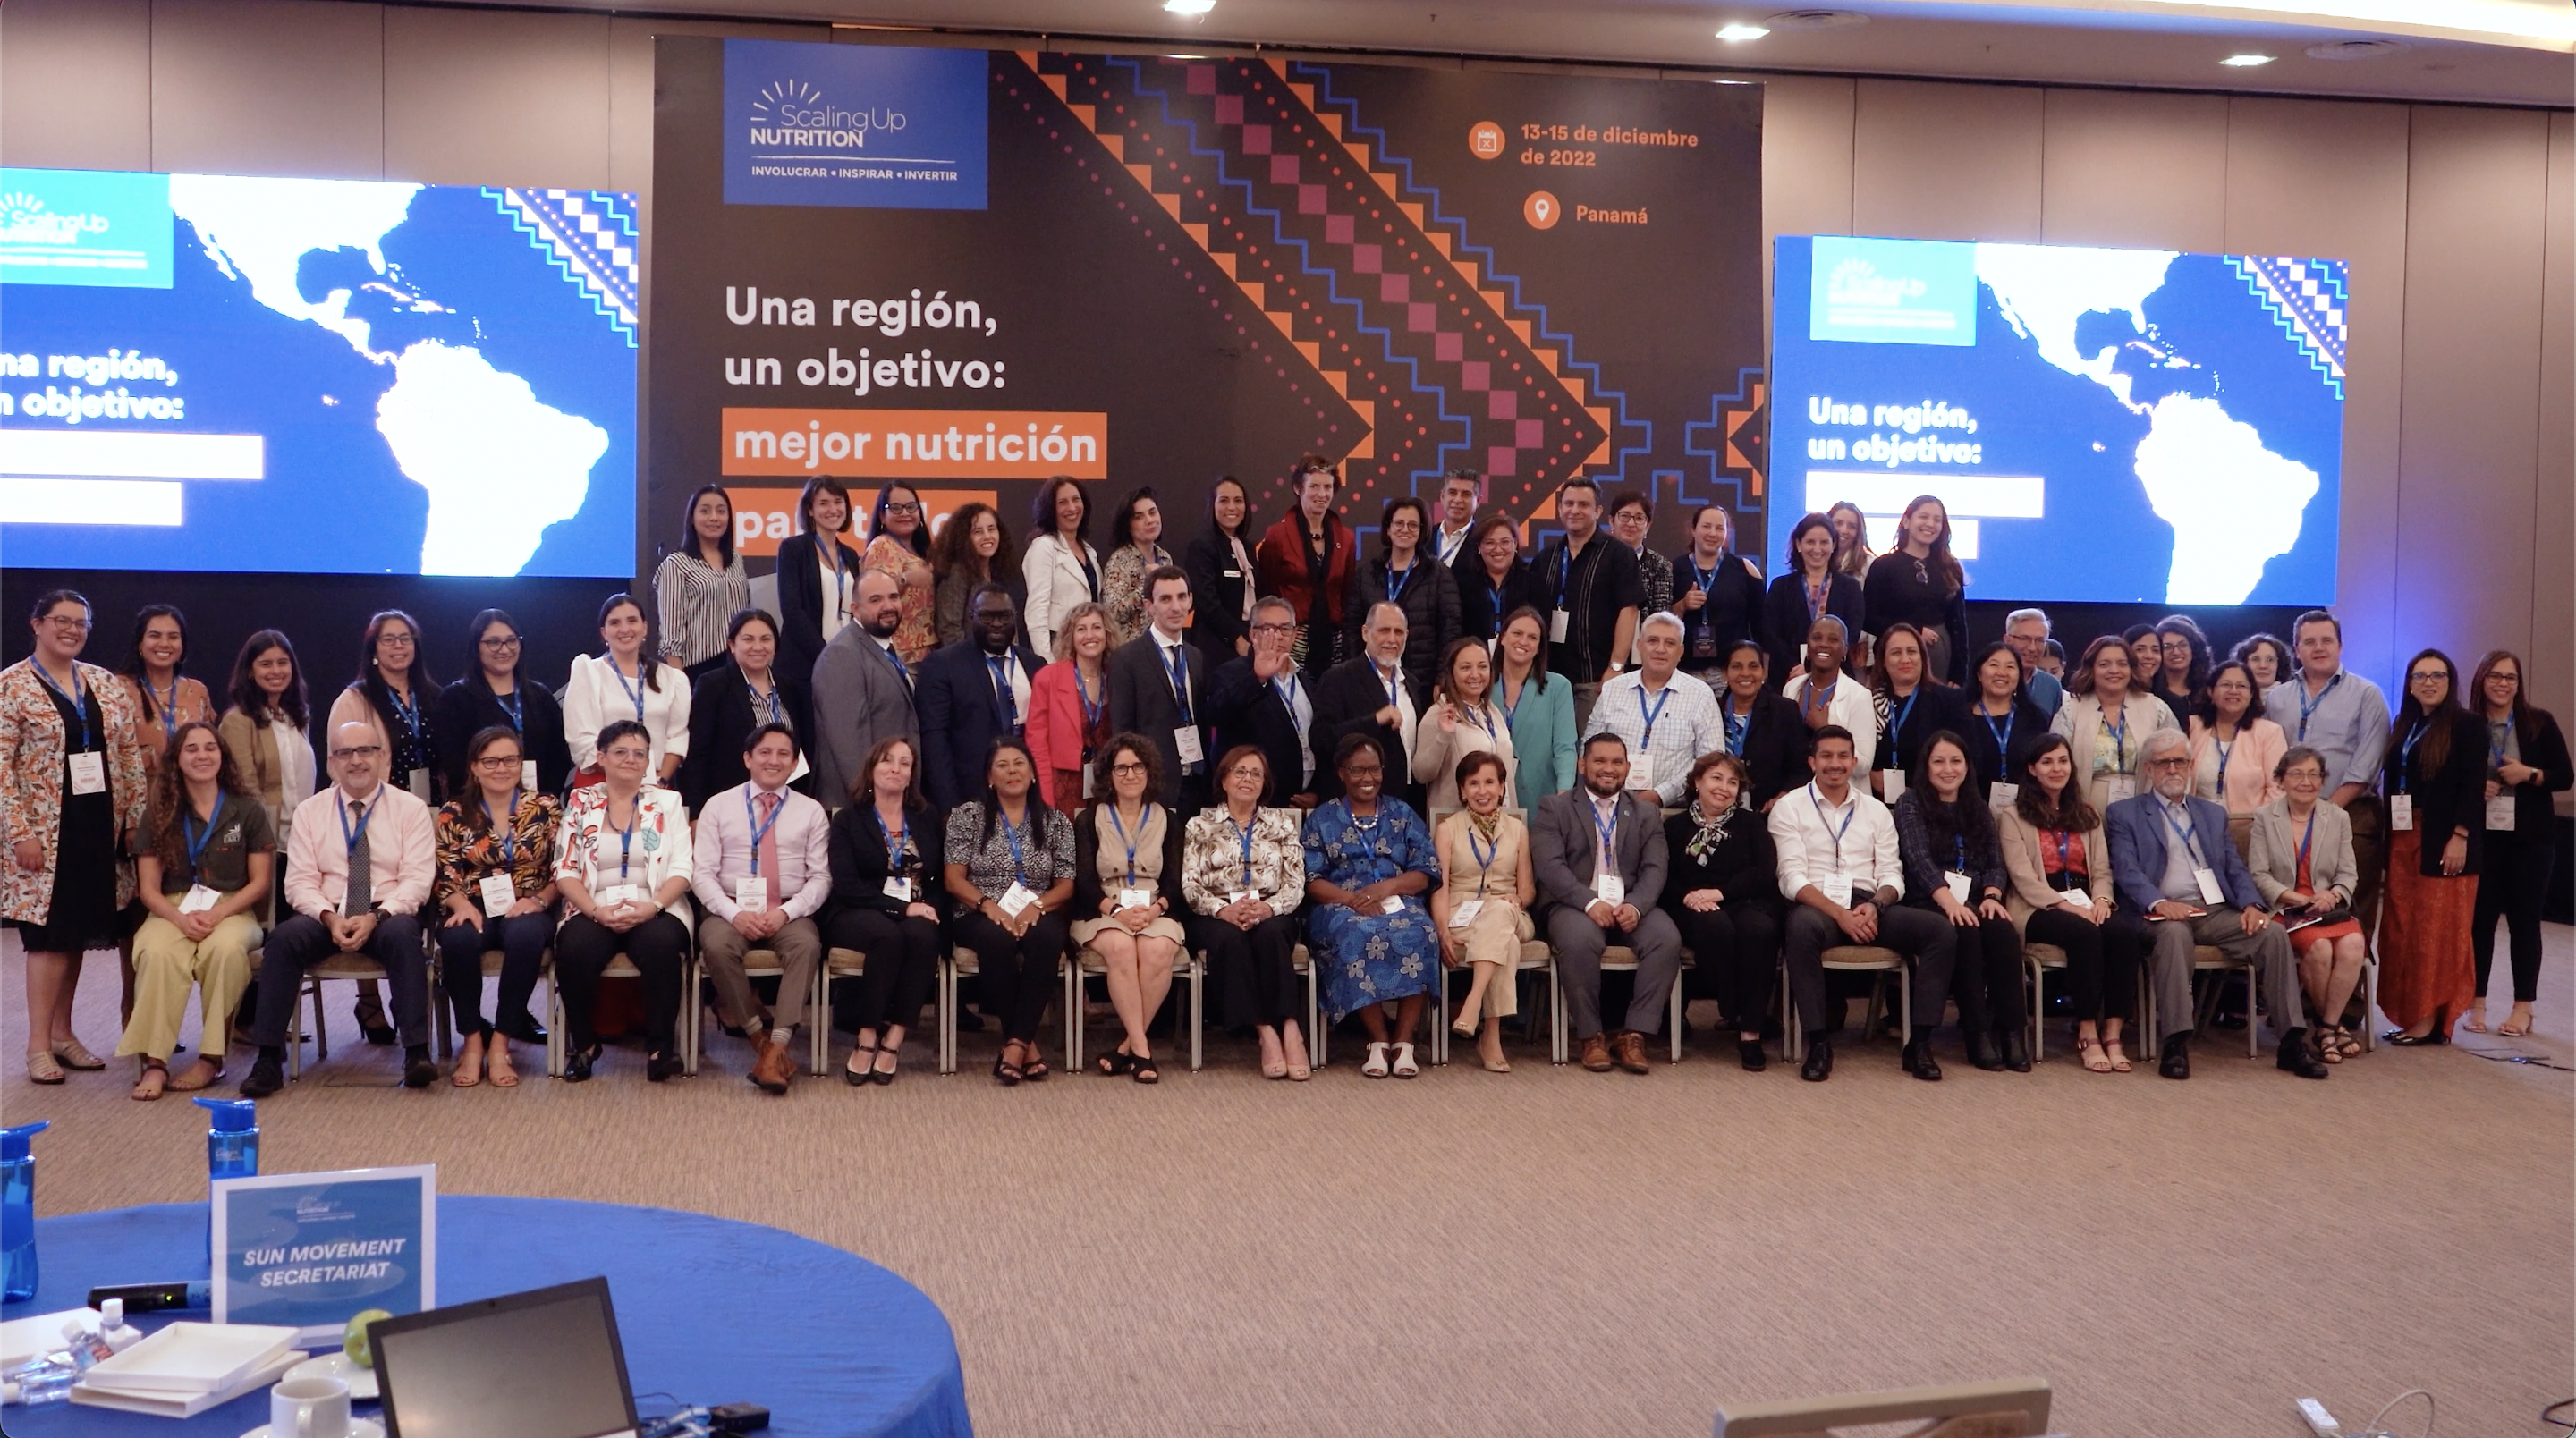 Participants of the regional meeting gathered for the final photo